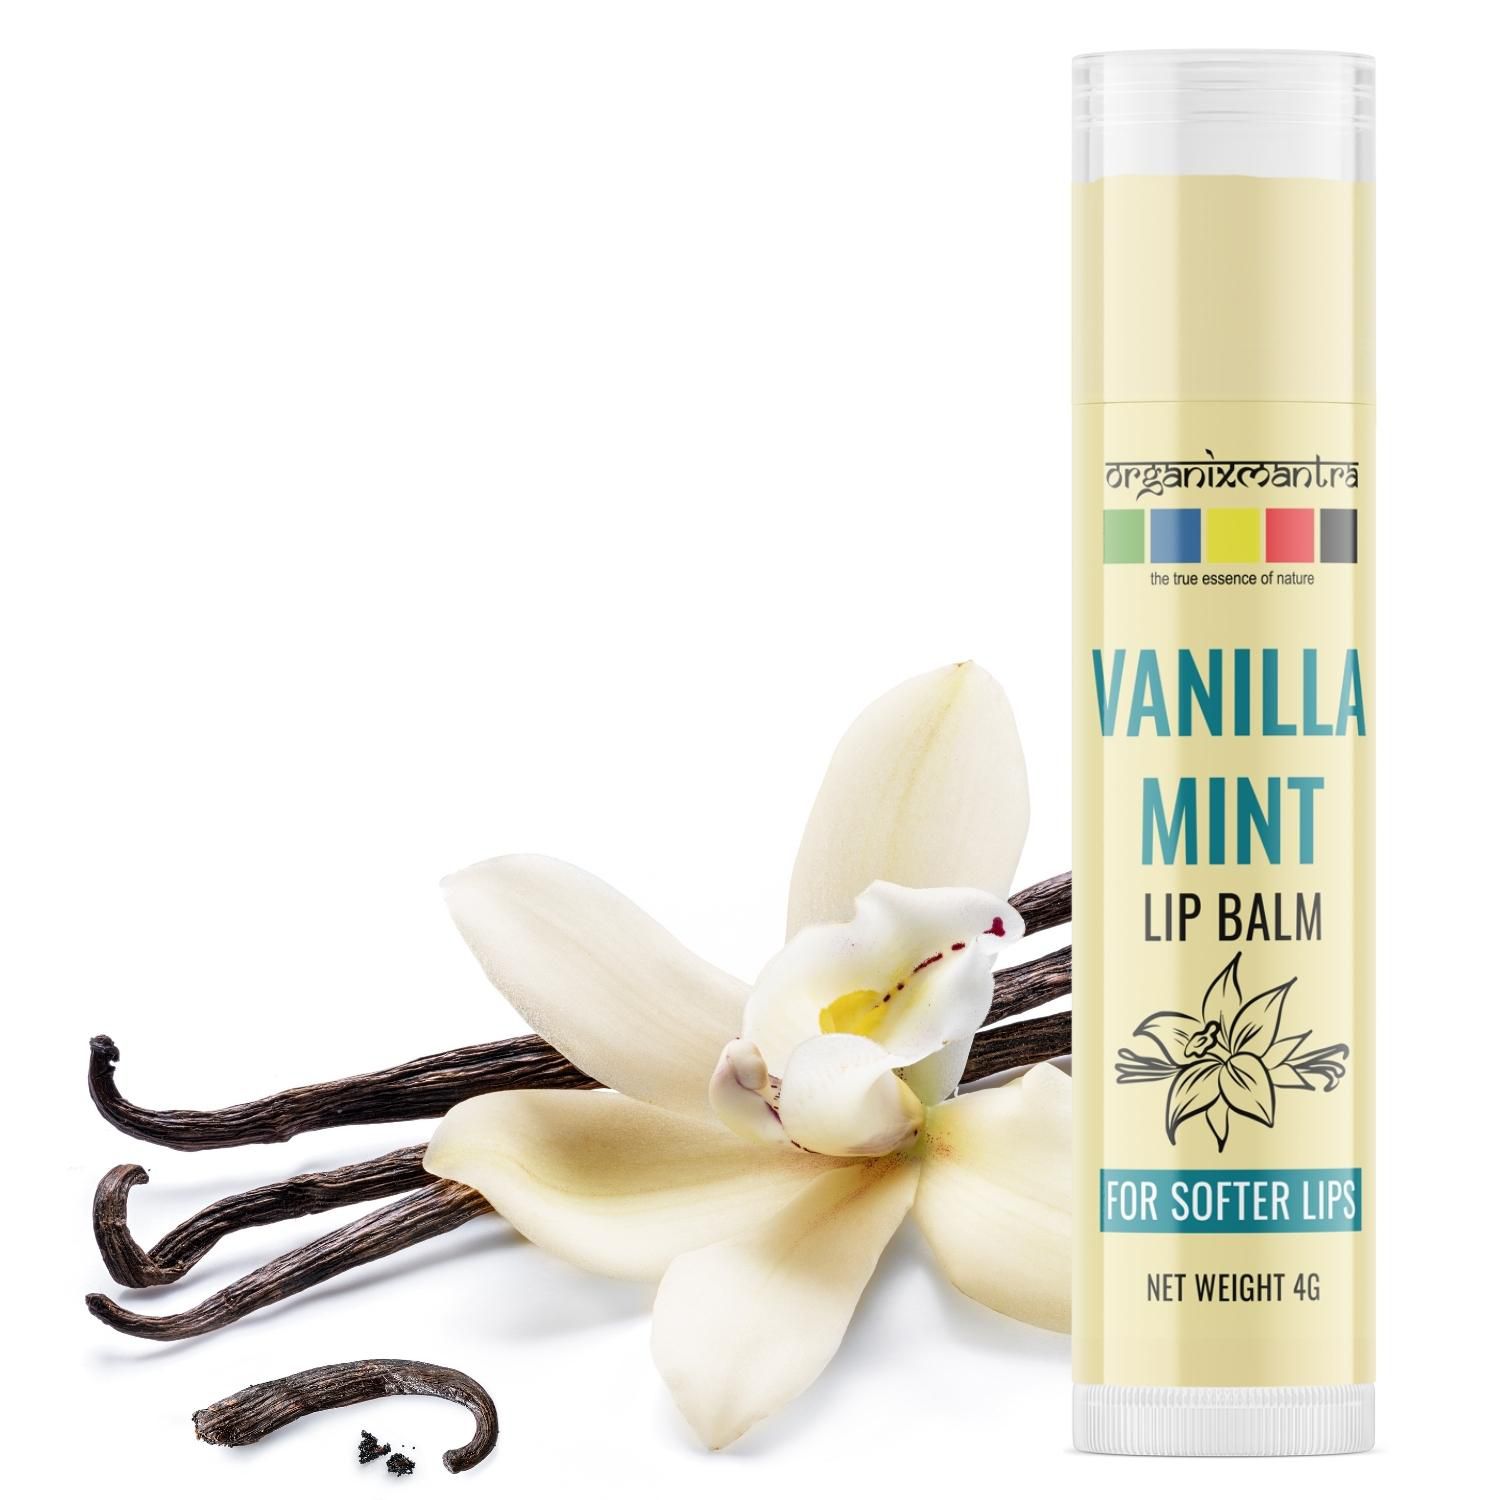     			Organix Mantra Vanilla Mint Lip Balm, Soothing Lip Care with Refreshing Flavor 4G